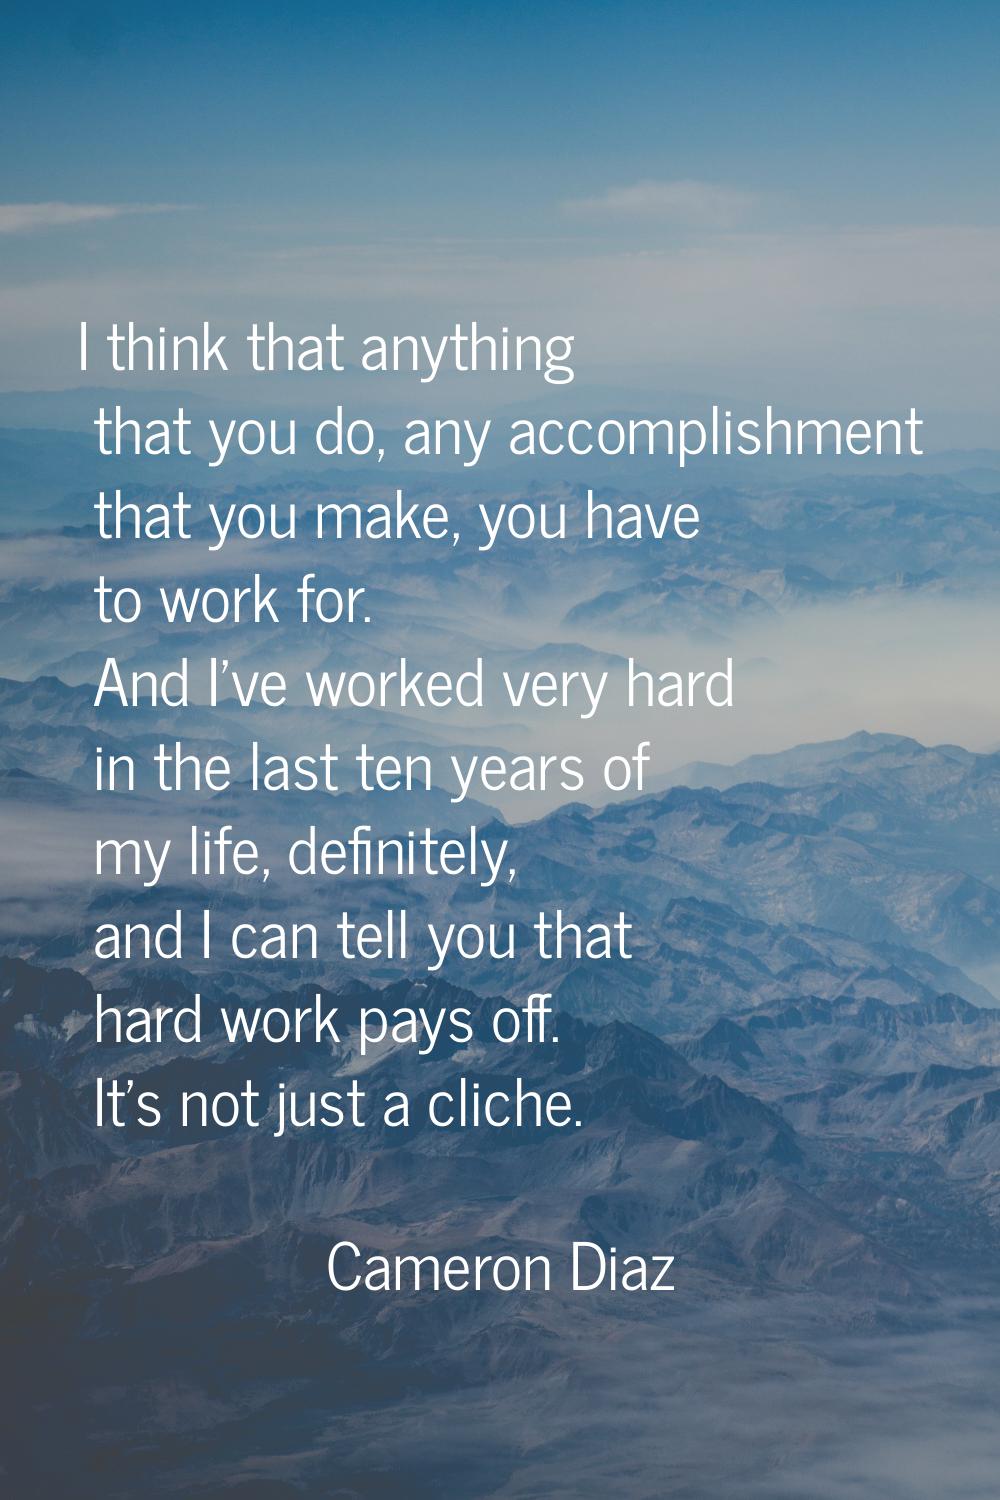 I think that anything that you do, any accomplishment that you make, you have to work for. And I've